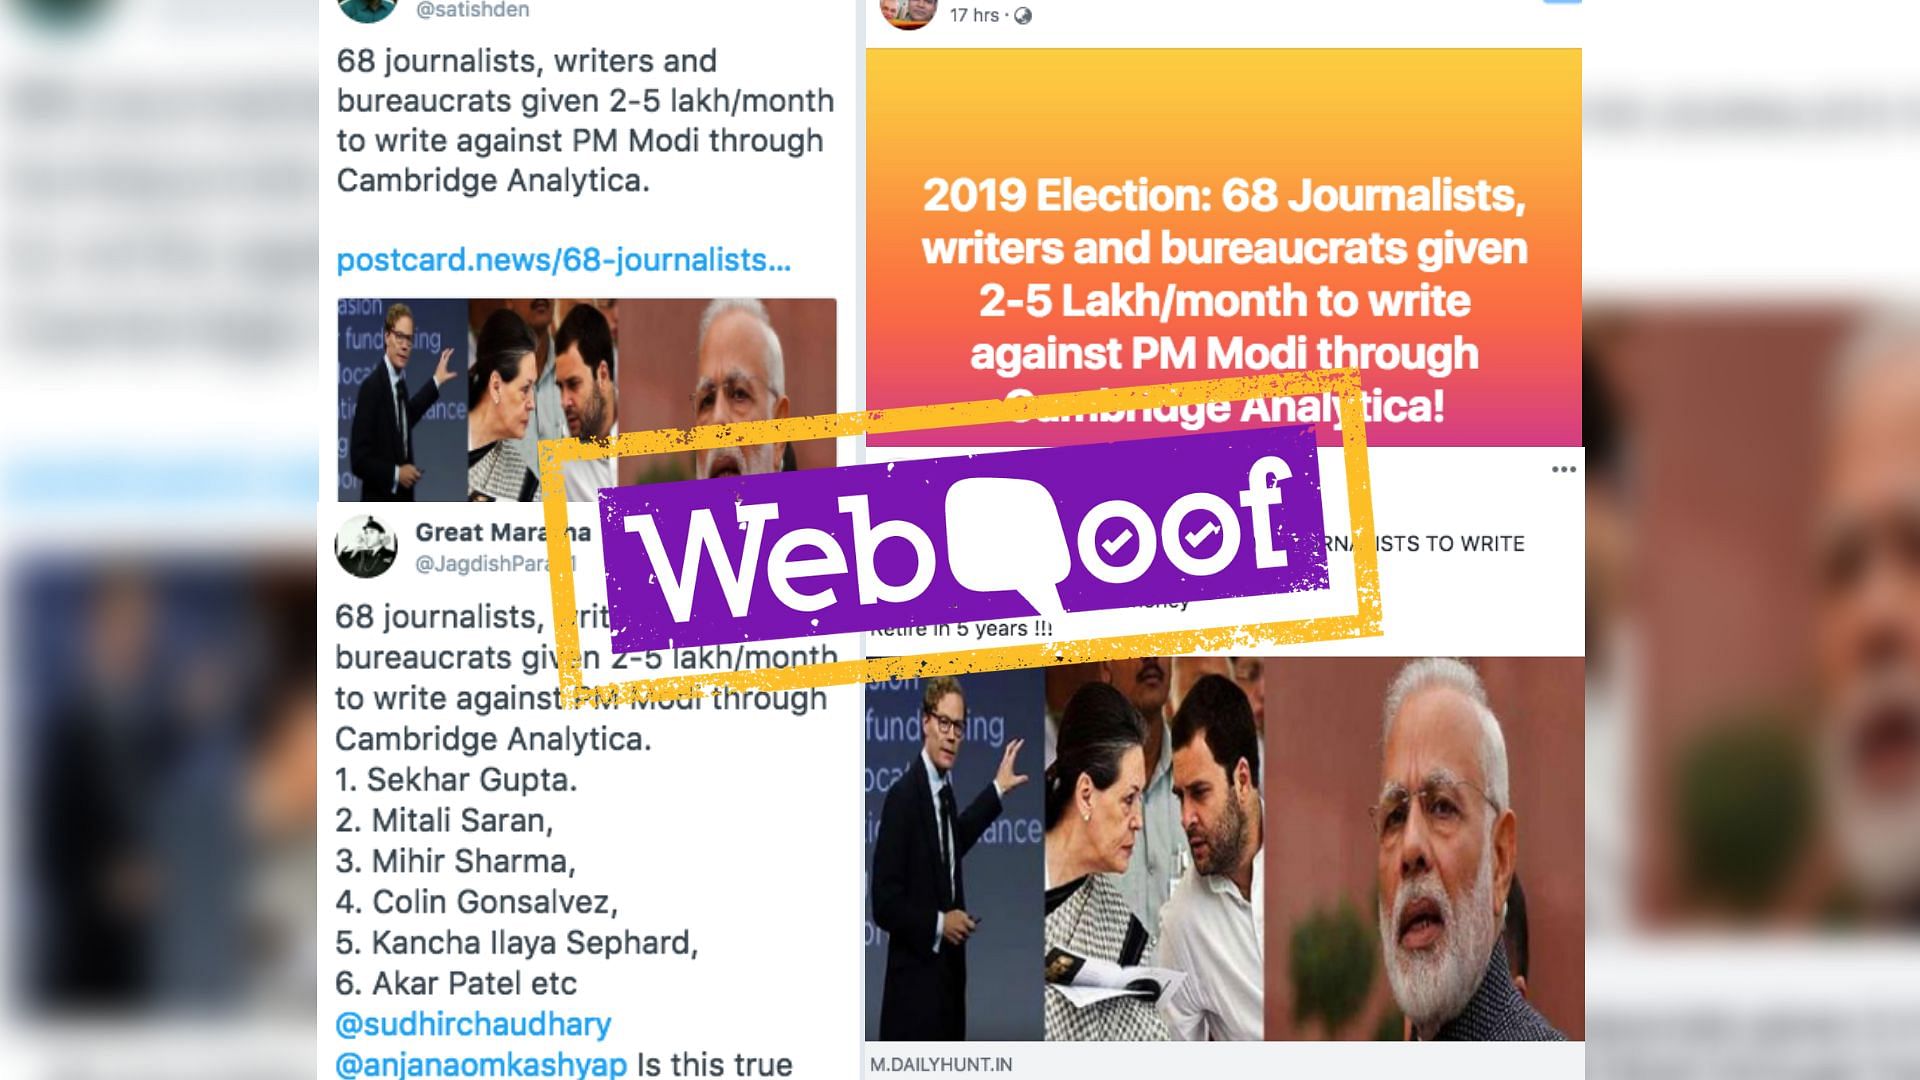 A viral post falsely claims that 68 journalists, writers and bureaucrats are being paid to write against PM Narendra Modi.